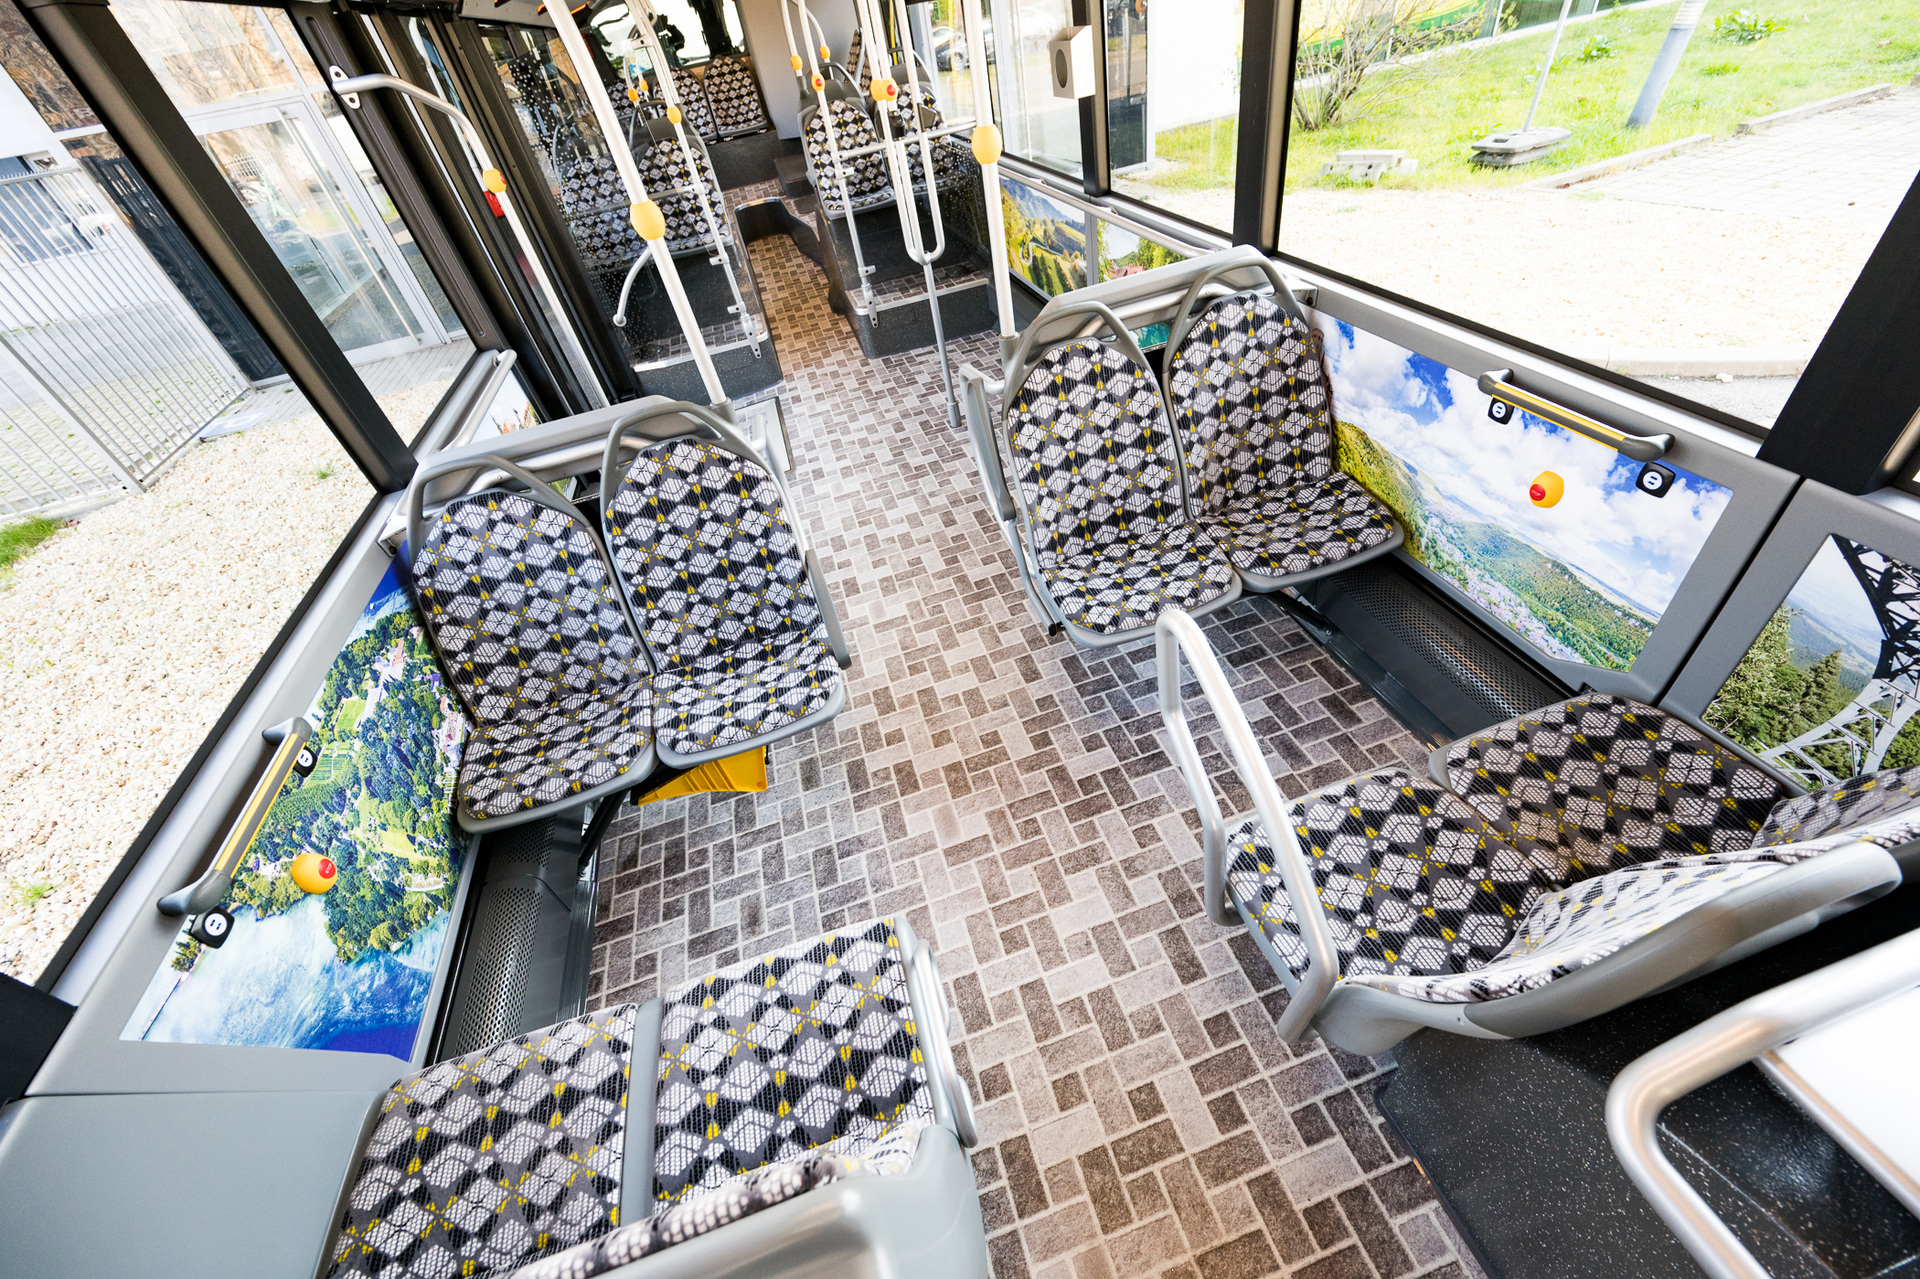 Spillmann wants to make buses the figurative mark of local public transportation